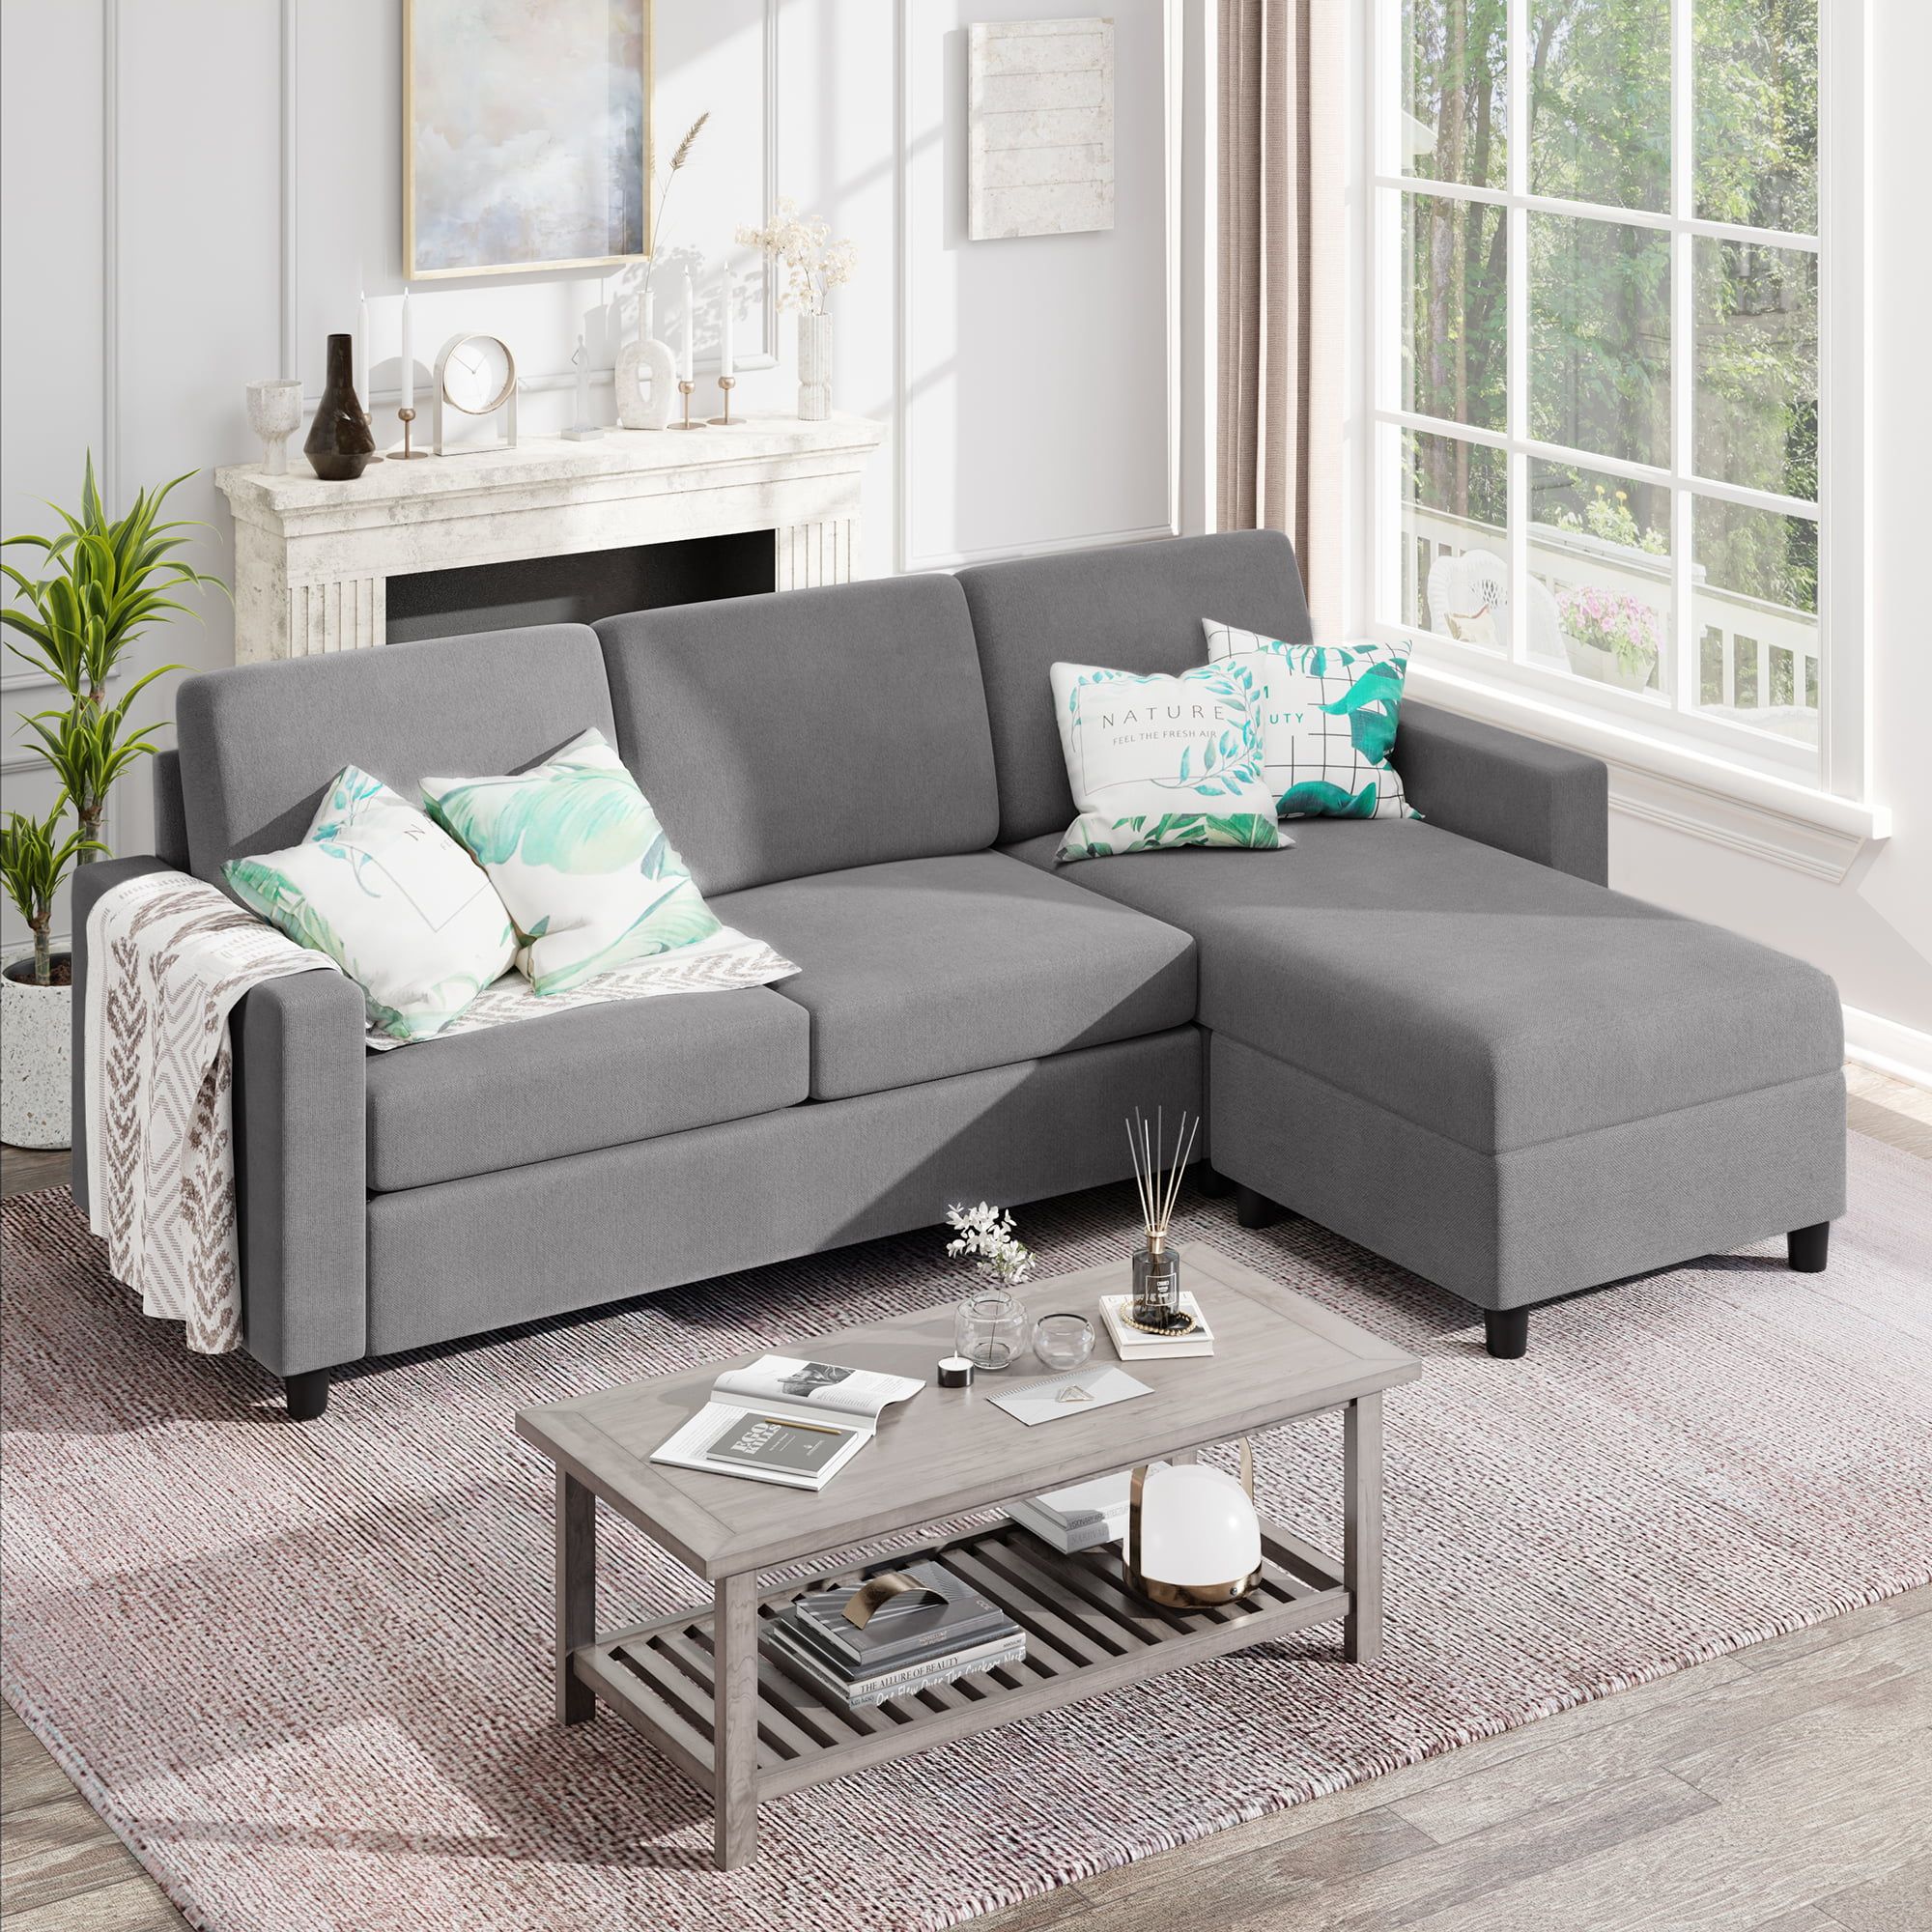 Sobaniilo Convertible Sectional Sofa Couch, Modern Linen Fabric L Shaped  3 Seat Sofa Sectional With Reversible Chaise For Small Space (dark Gray) –  Walmart Intended For L Shapped Apartment Sofas (View 13 of 20)